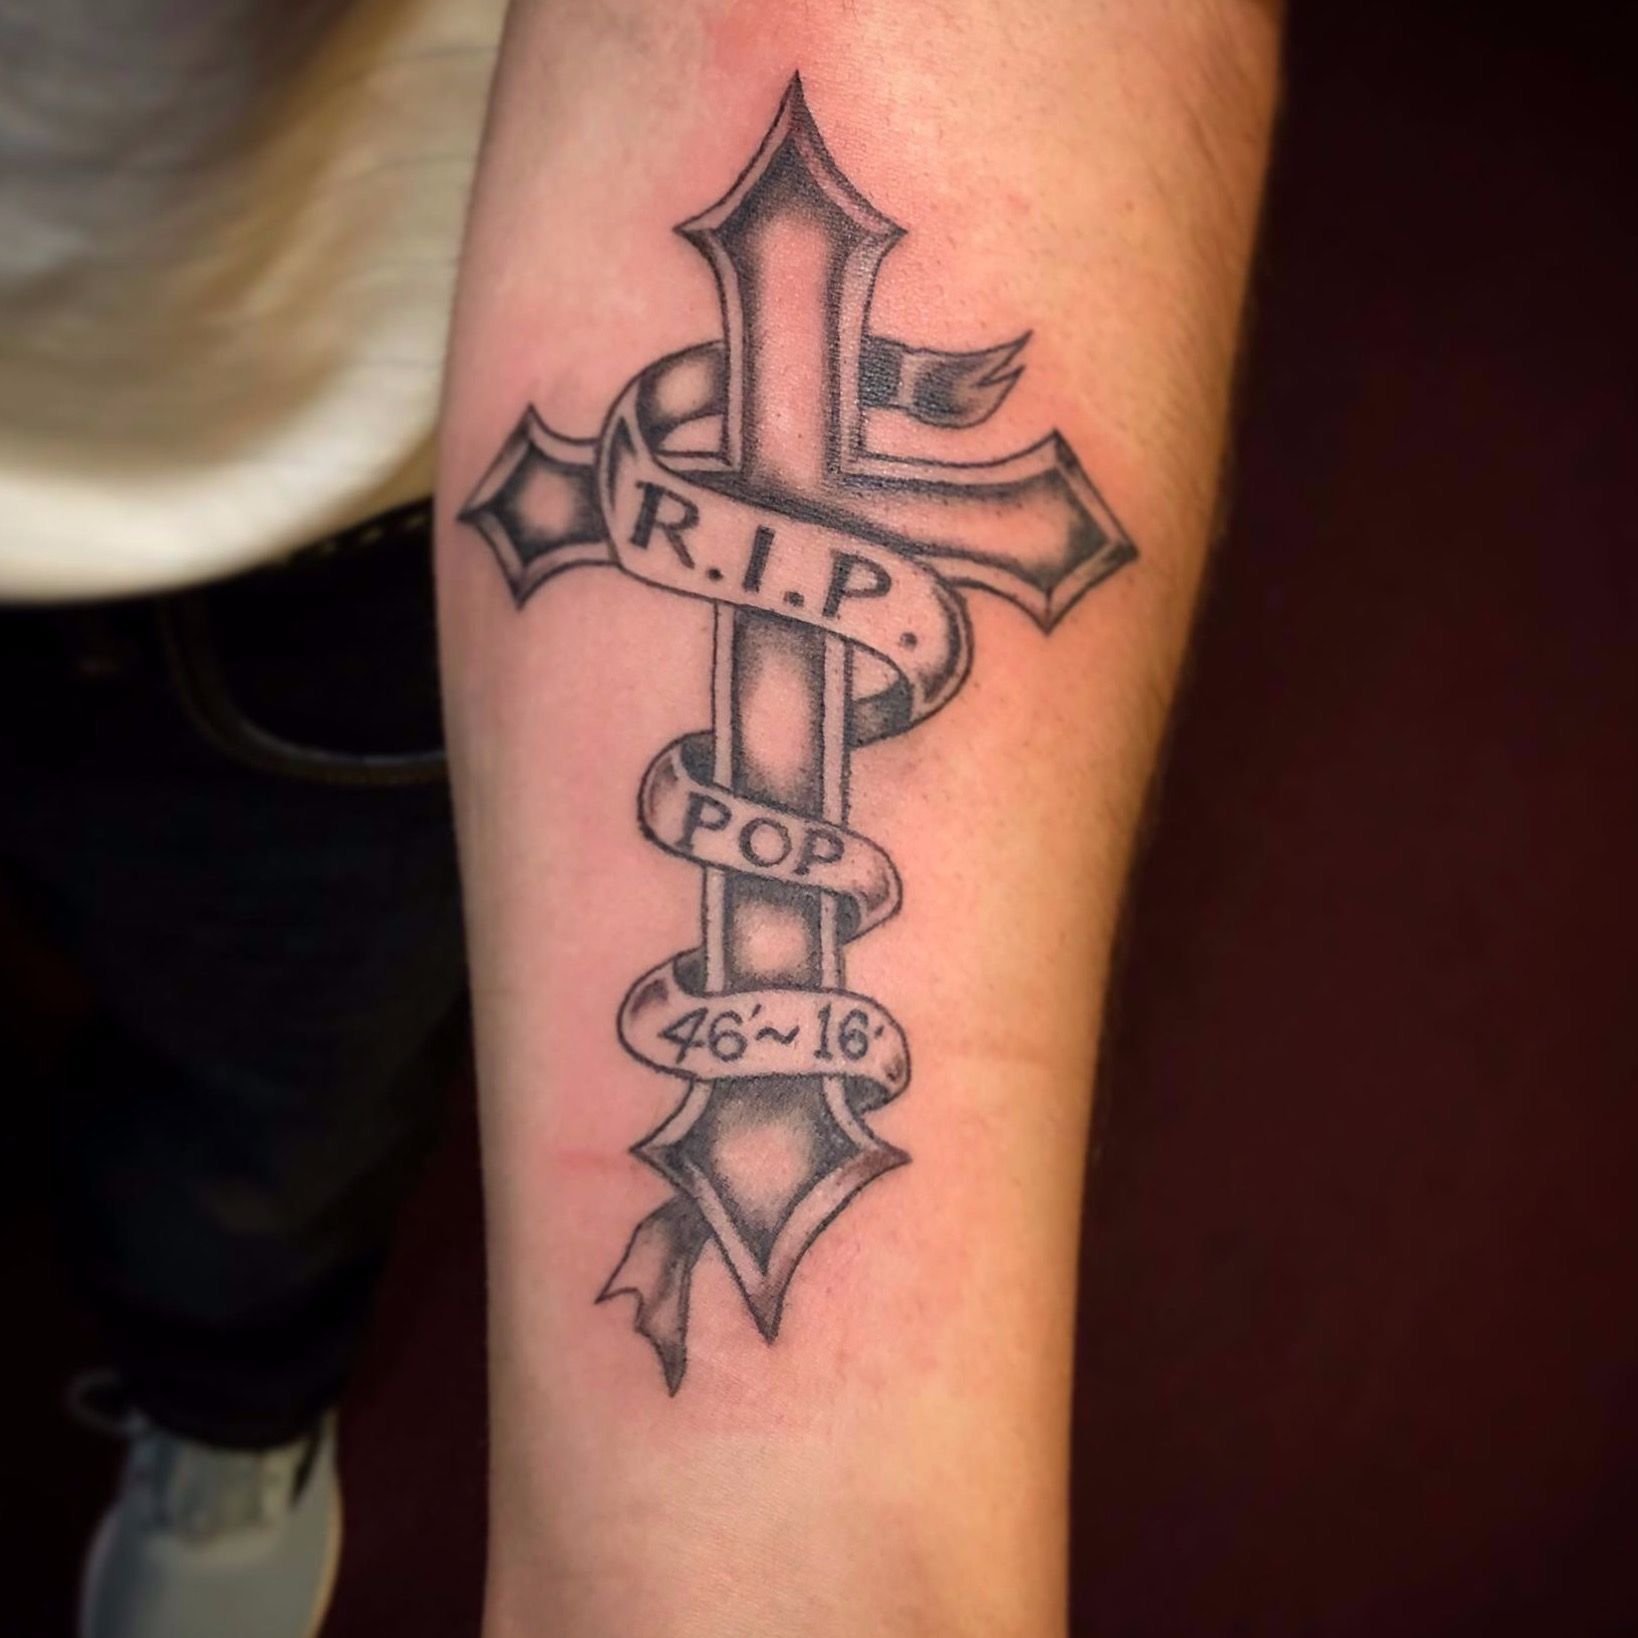 Amour Tattoo  Cross with ribbon and lettering arm tattoo Done by Mimi  Ink  Facebook